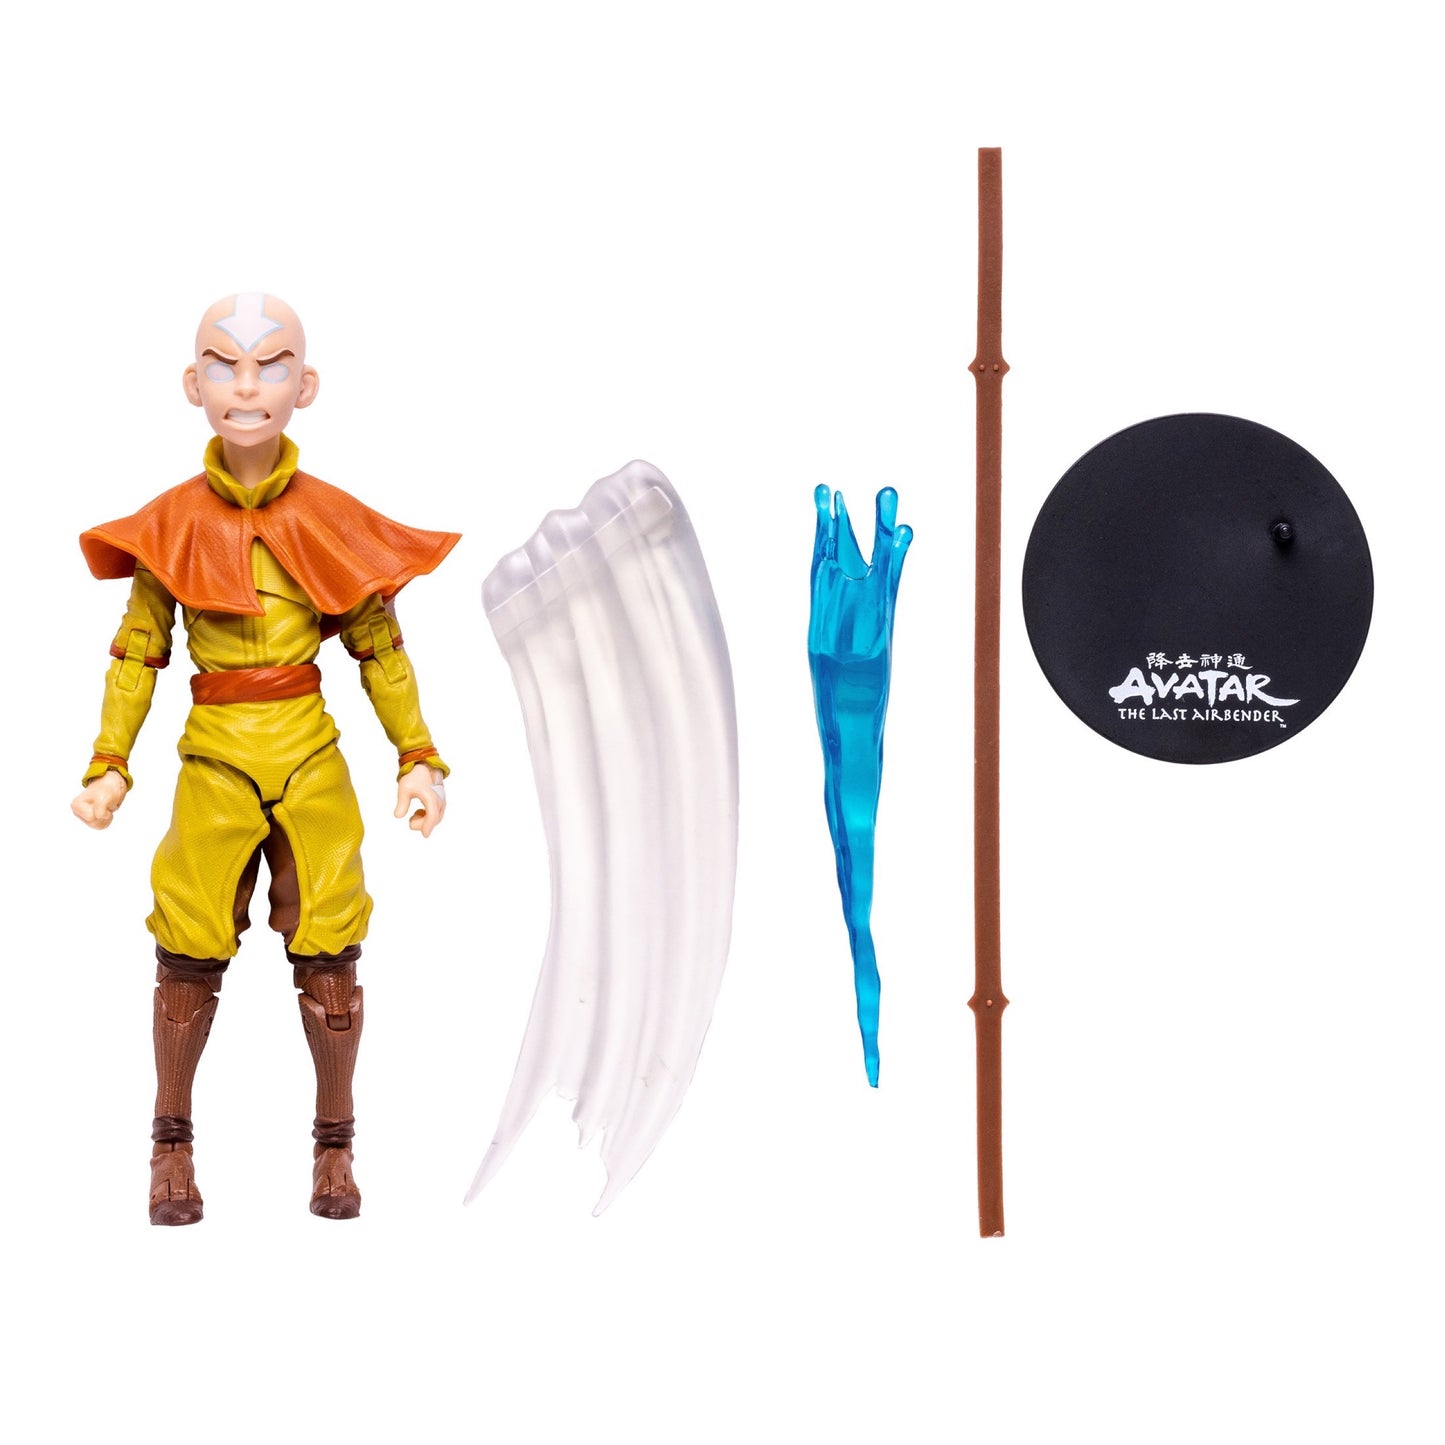 McFarlane Toys Avatar: The Last Airbender Aang Avatar State Gold Label 7-in Action Figure